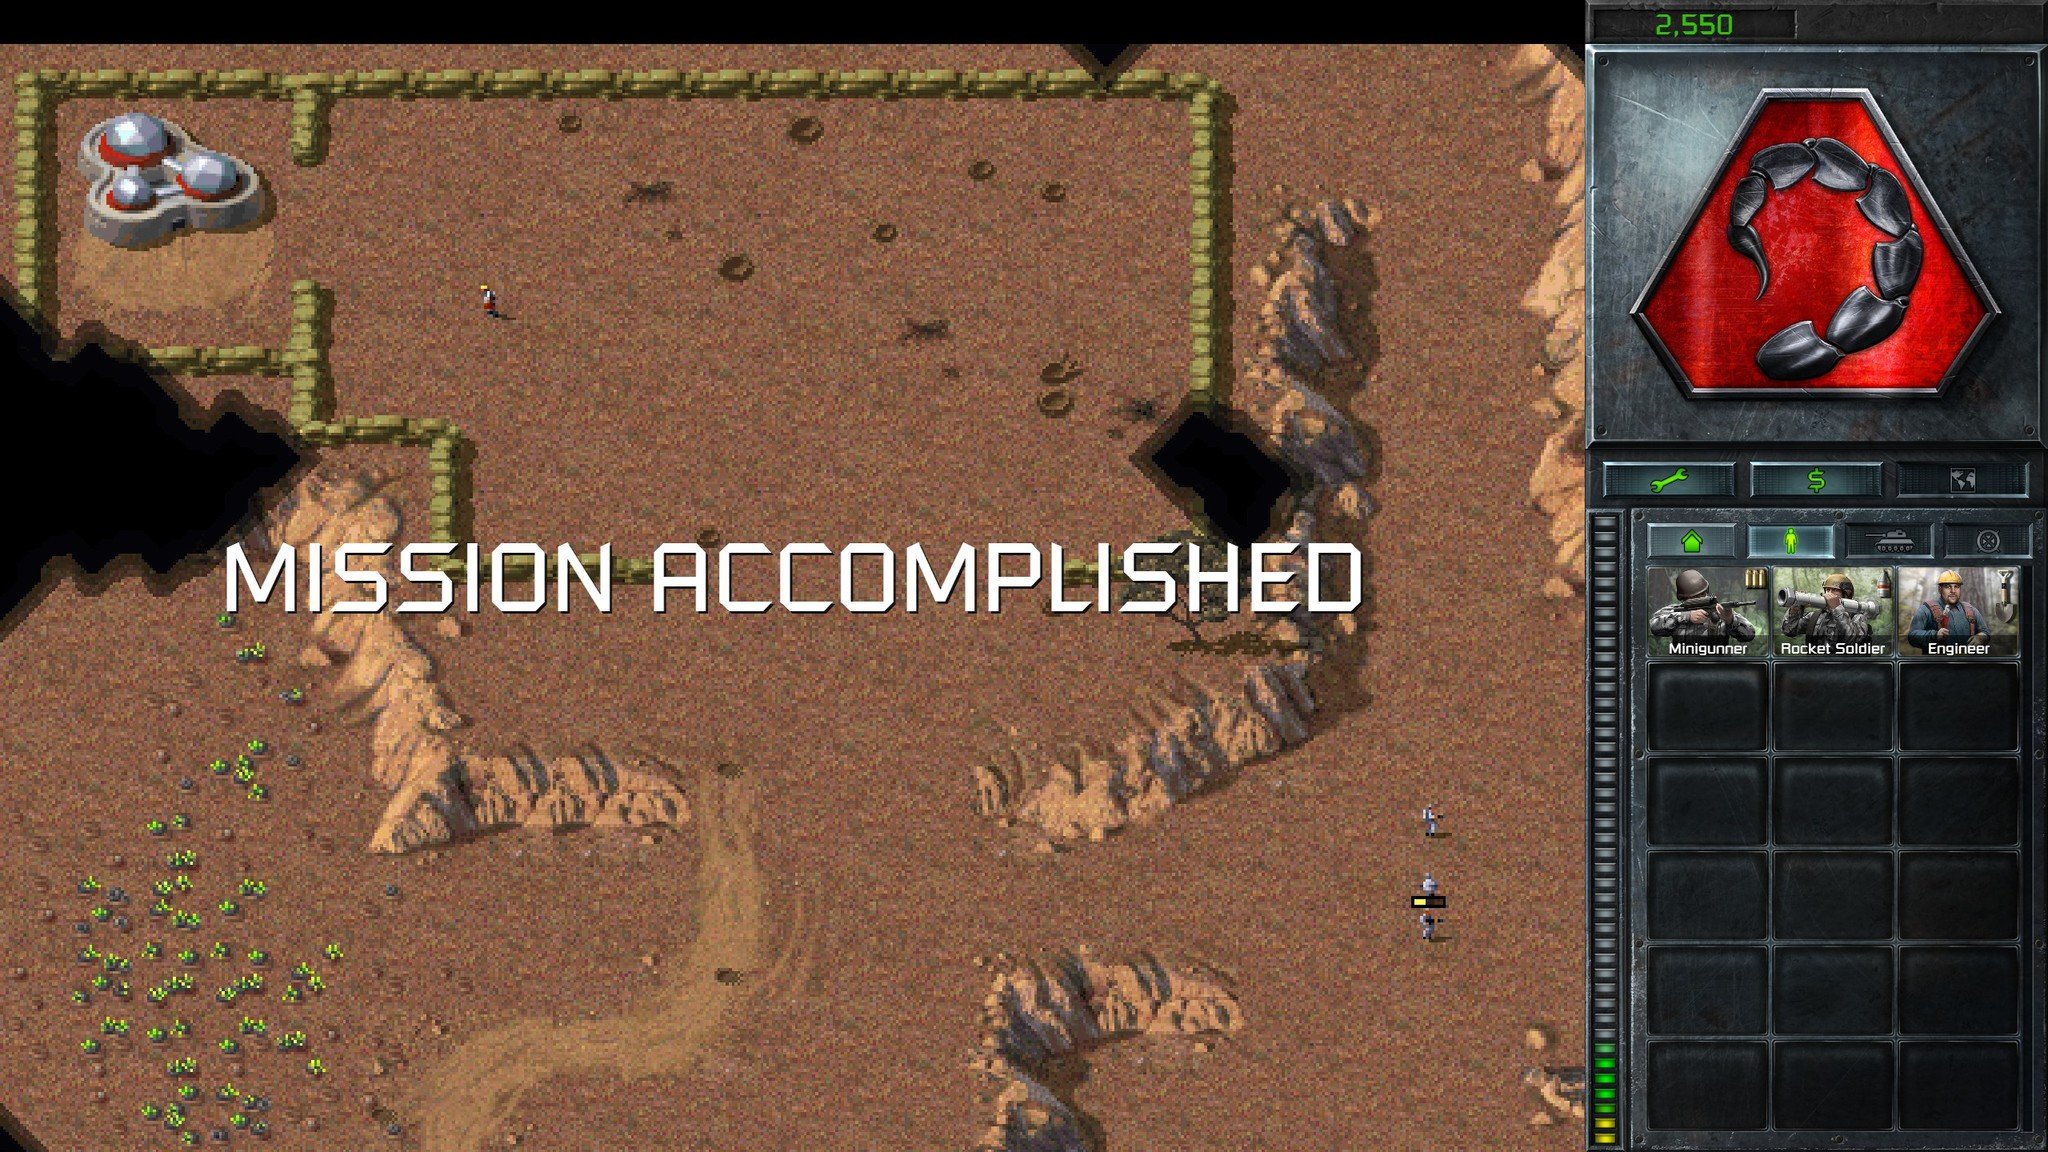 command-and-conquer-mission-accomplished-screen.jpg